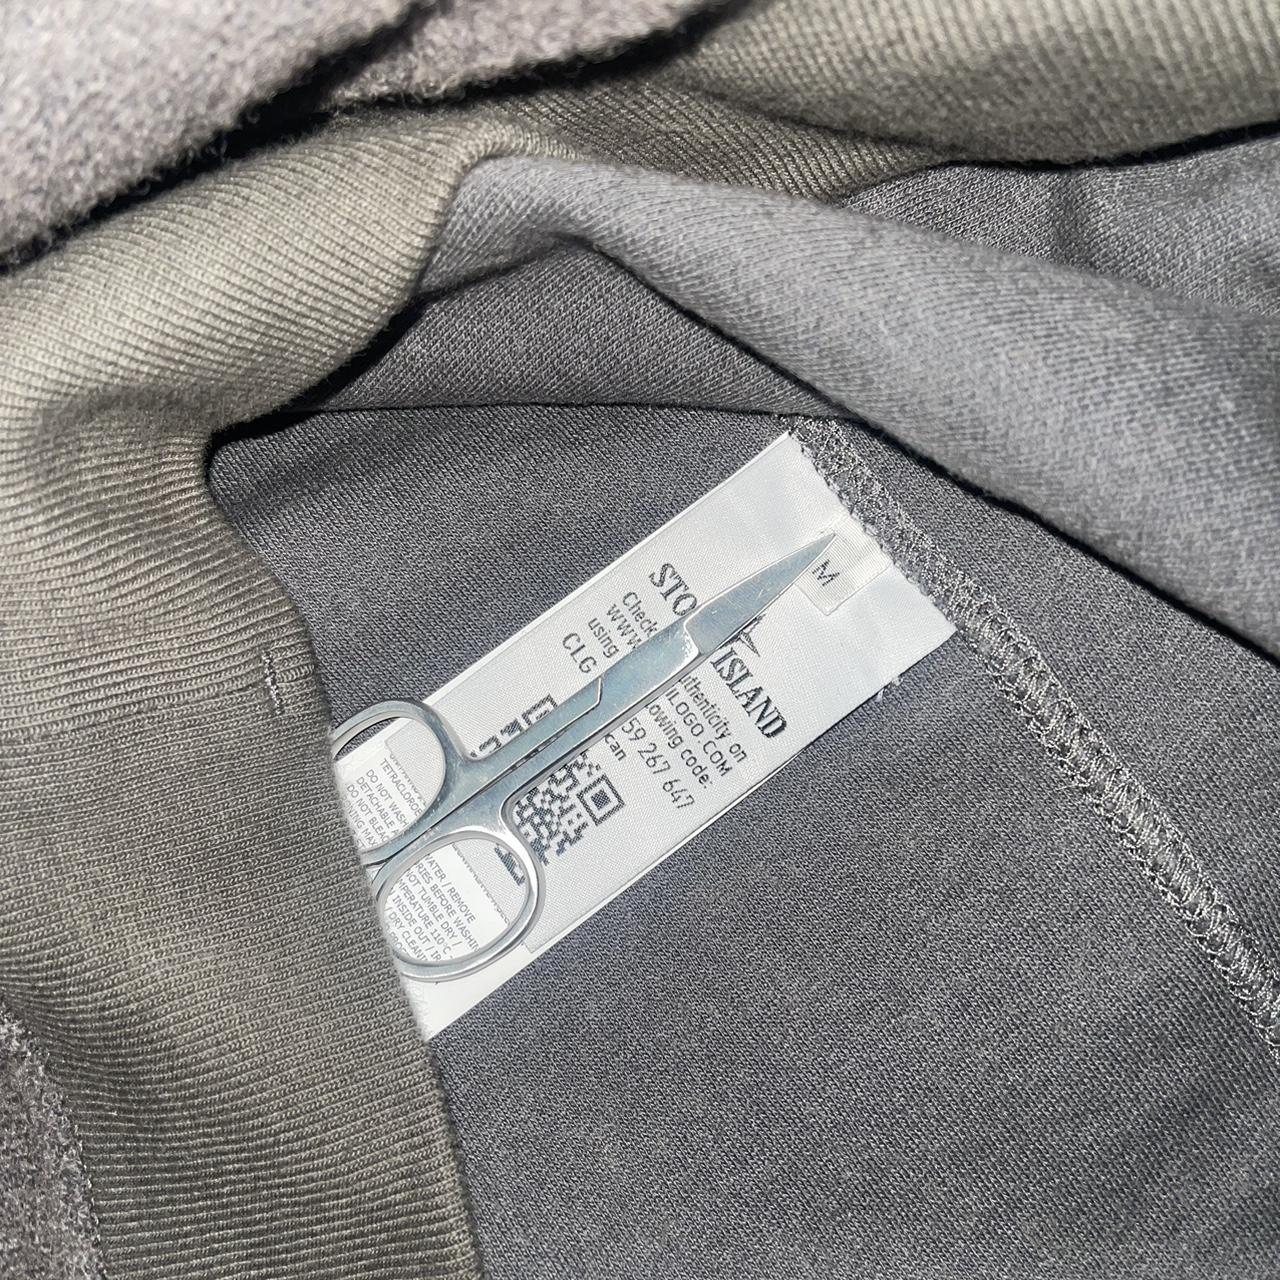 Here is a rare stone island grey ghost jumper. This... - Depop